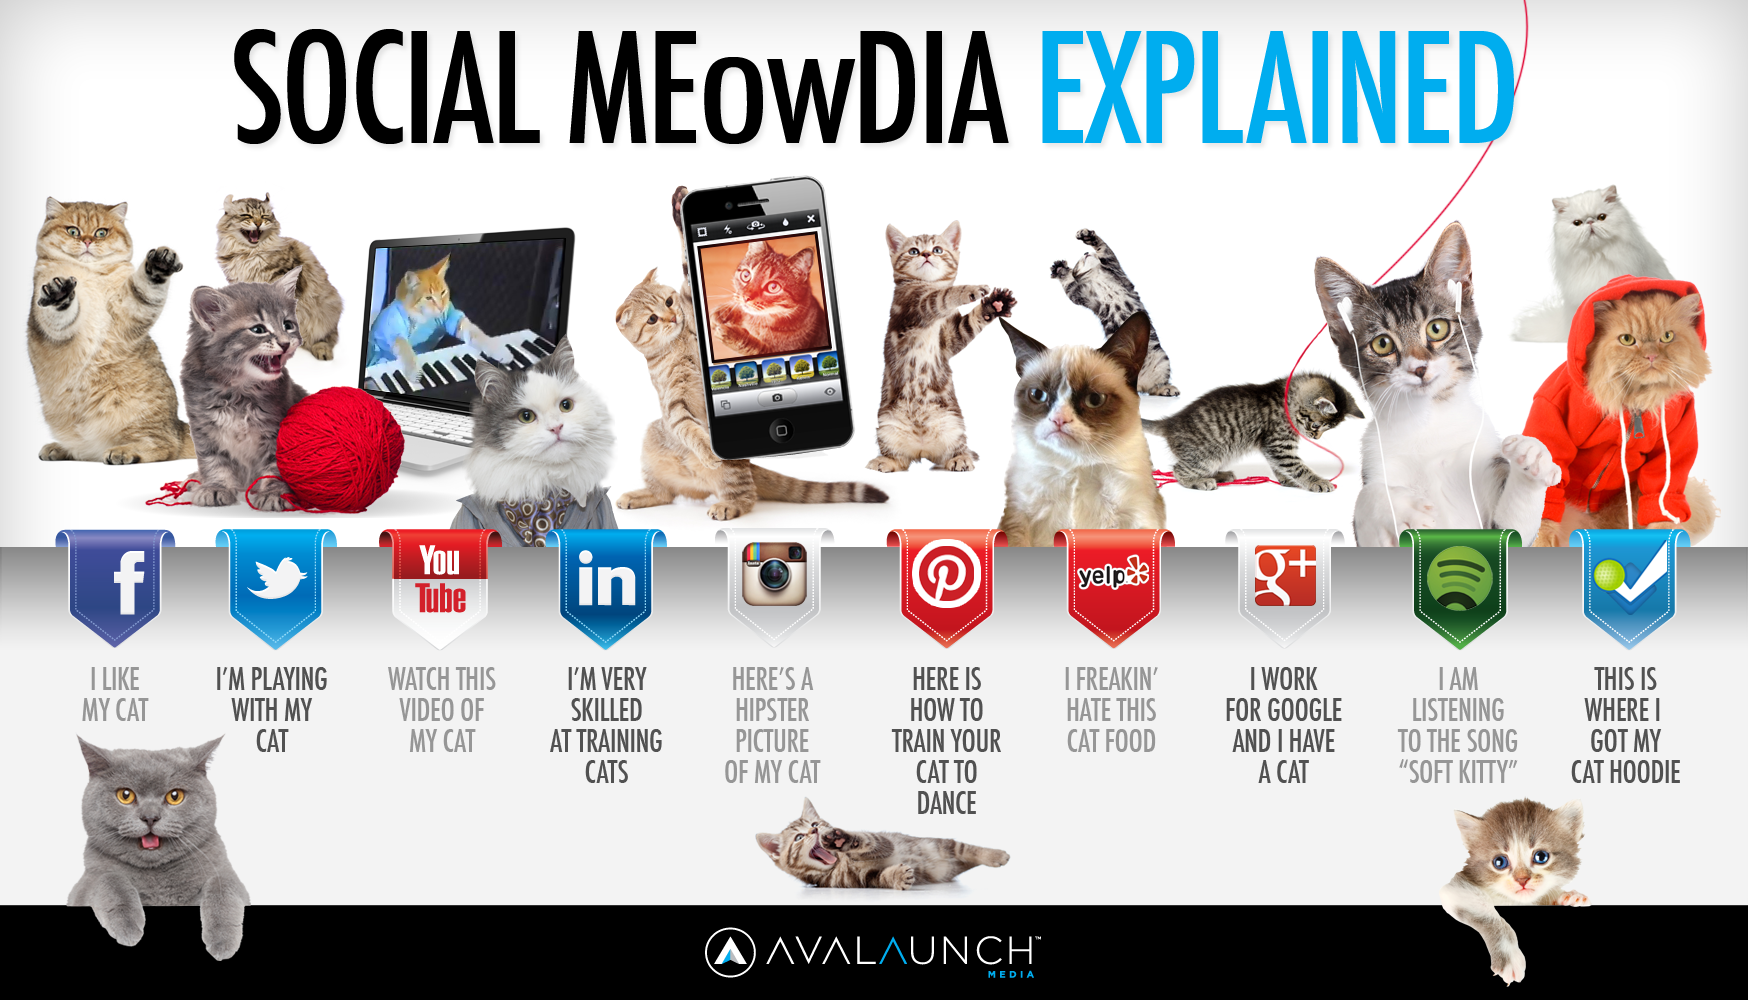 Social MEowDia Explained by Famous Cats